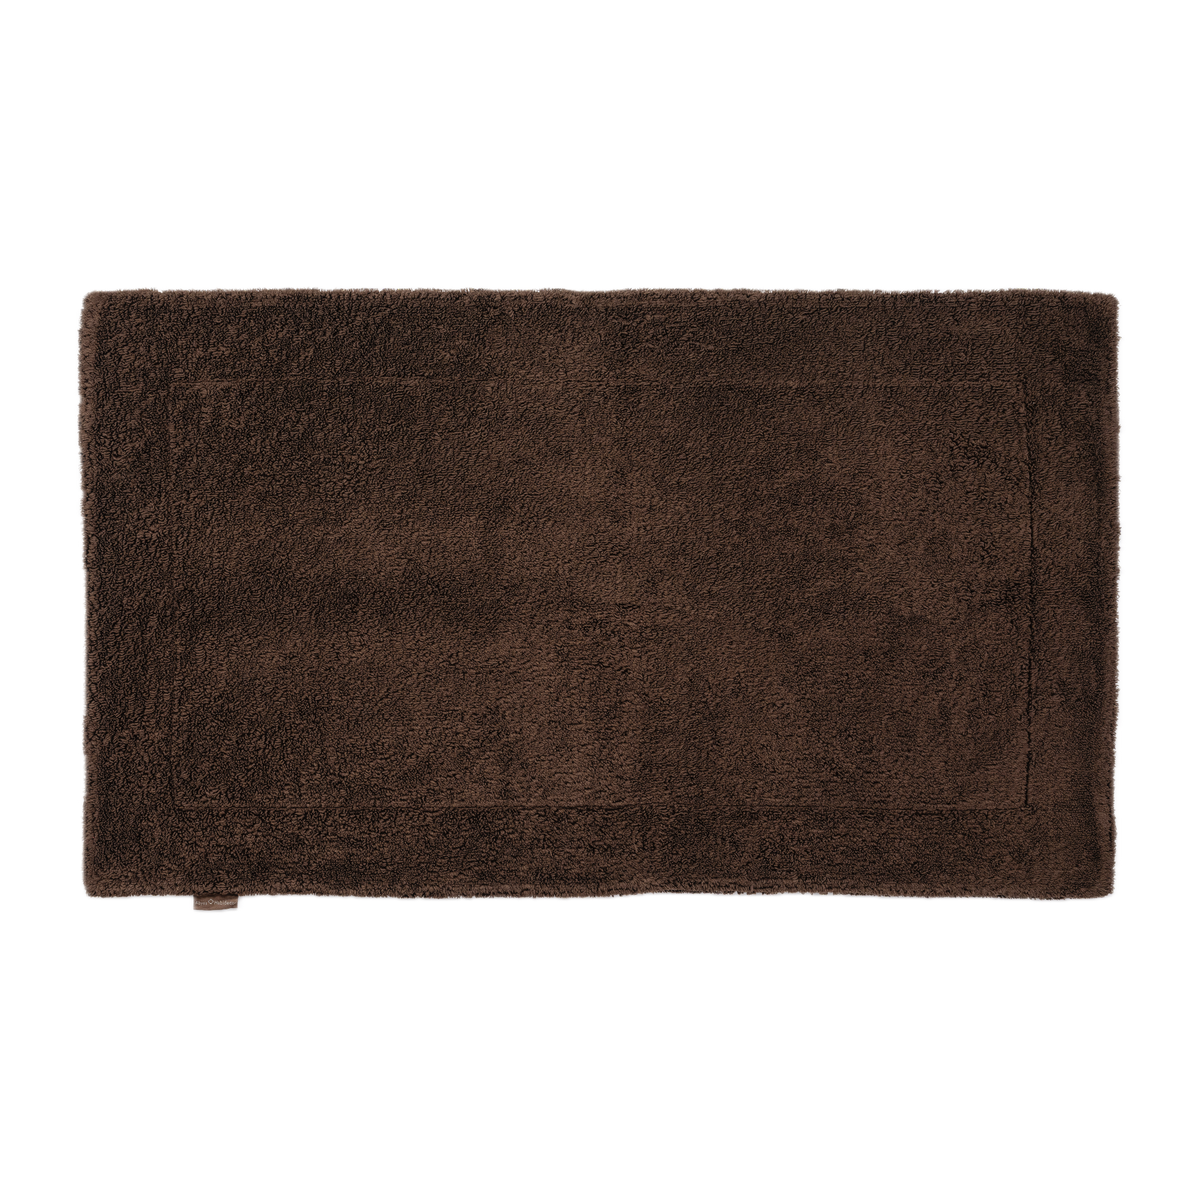 Abyss Super Pile Bath Mat in Mustang Color